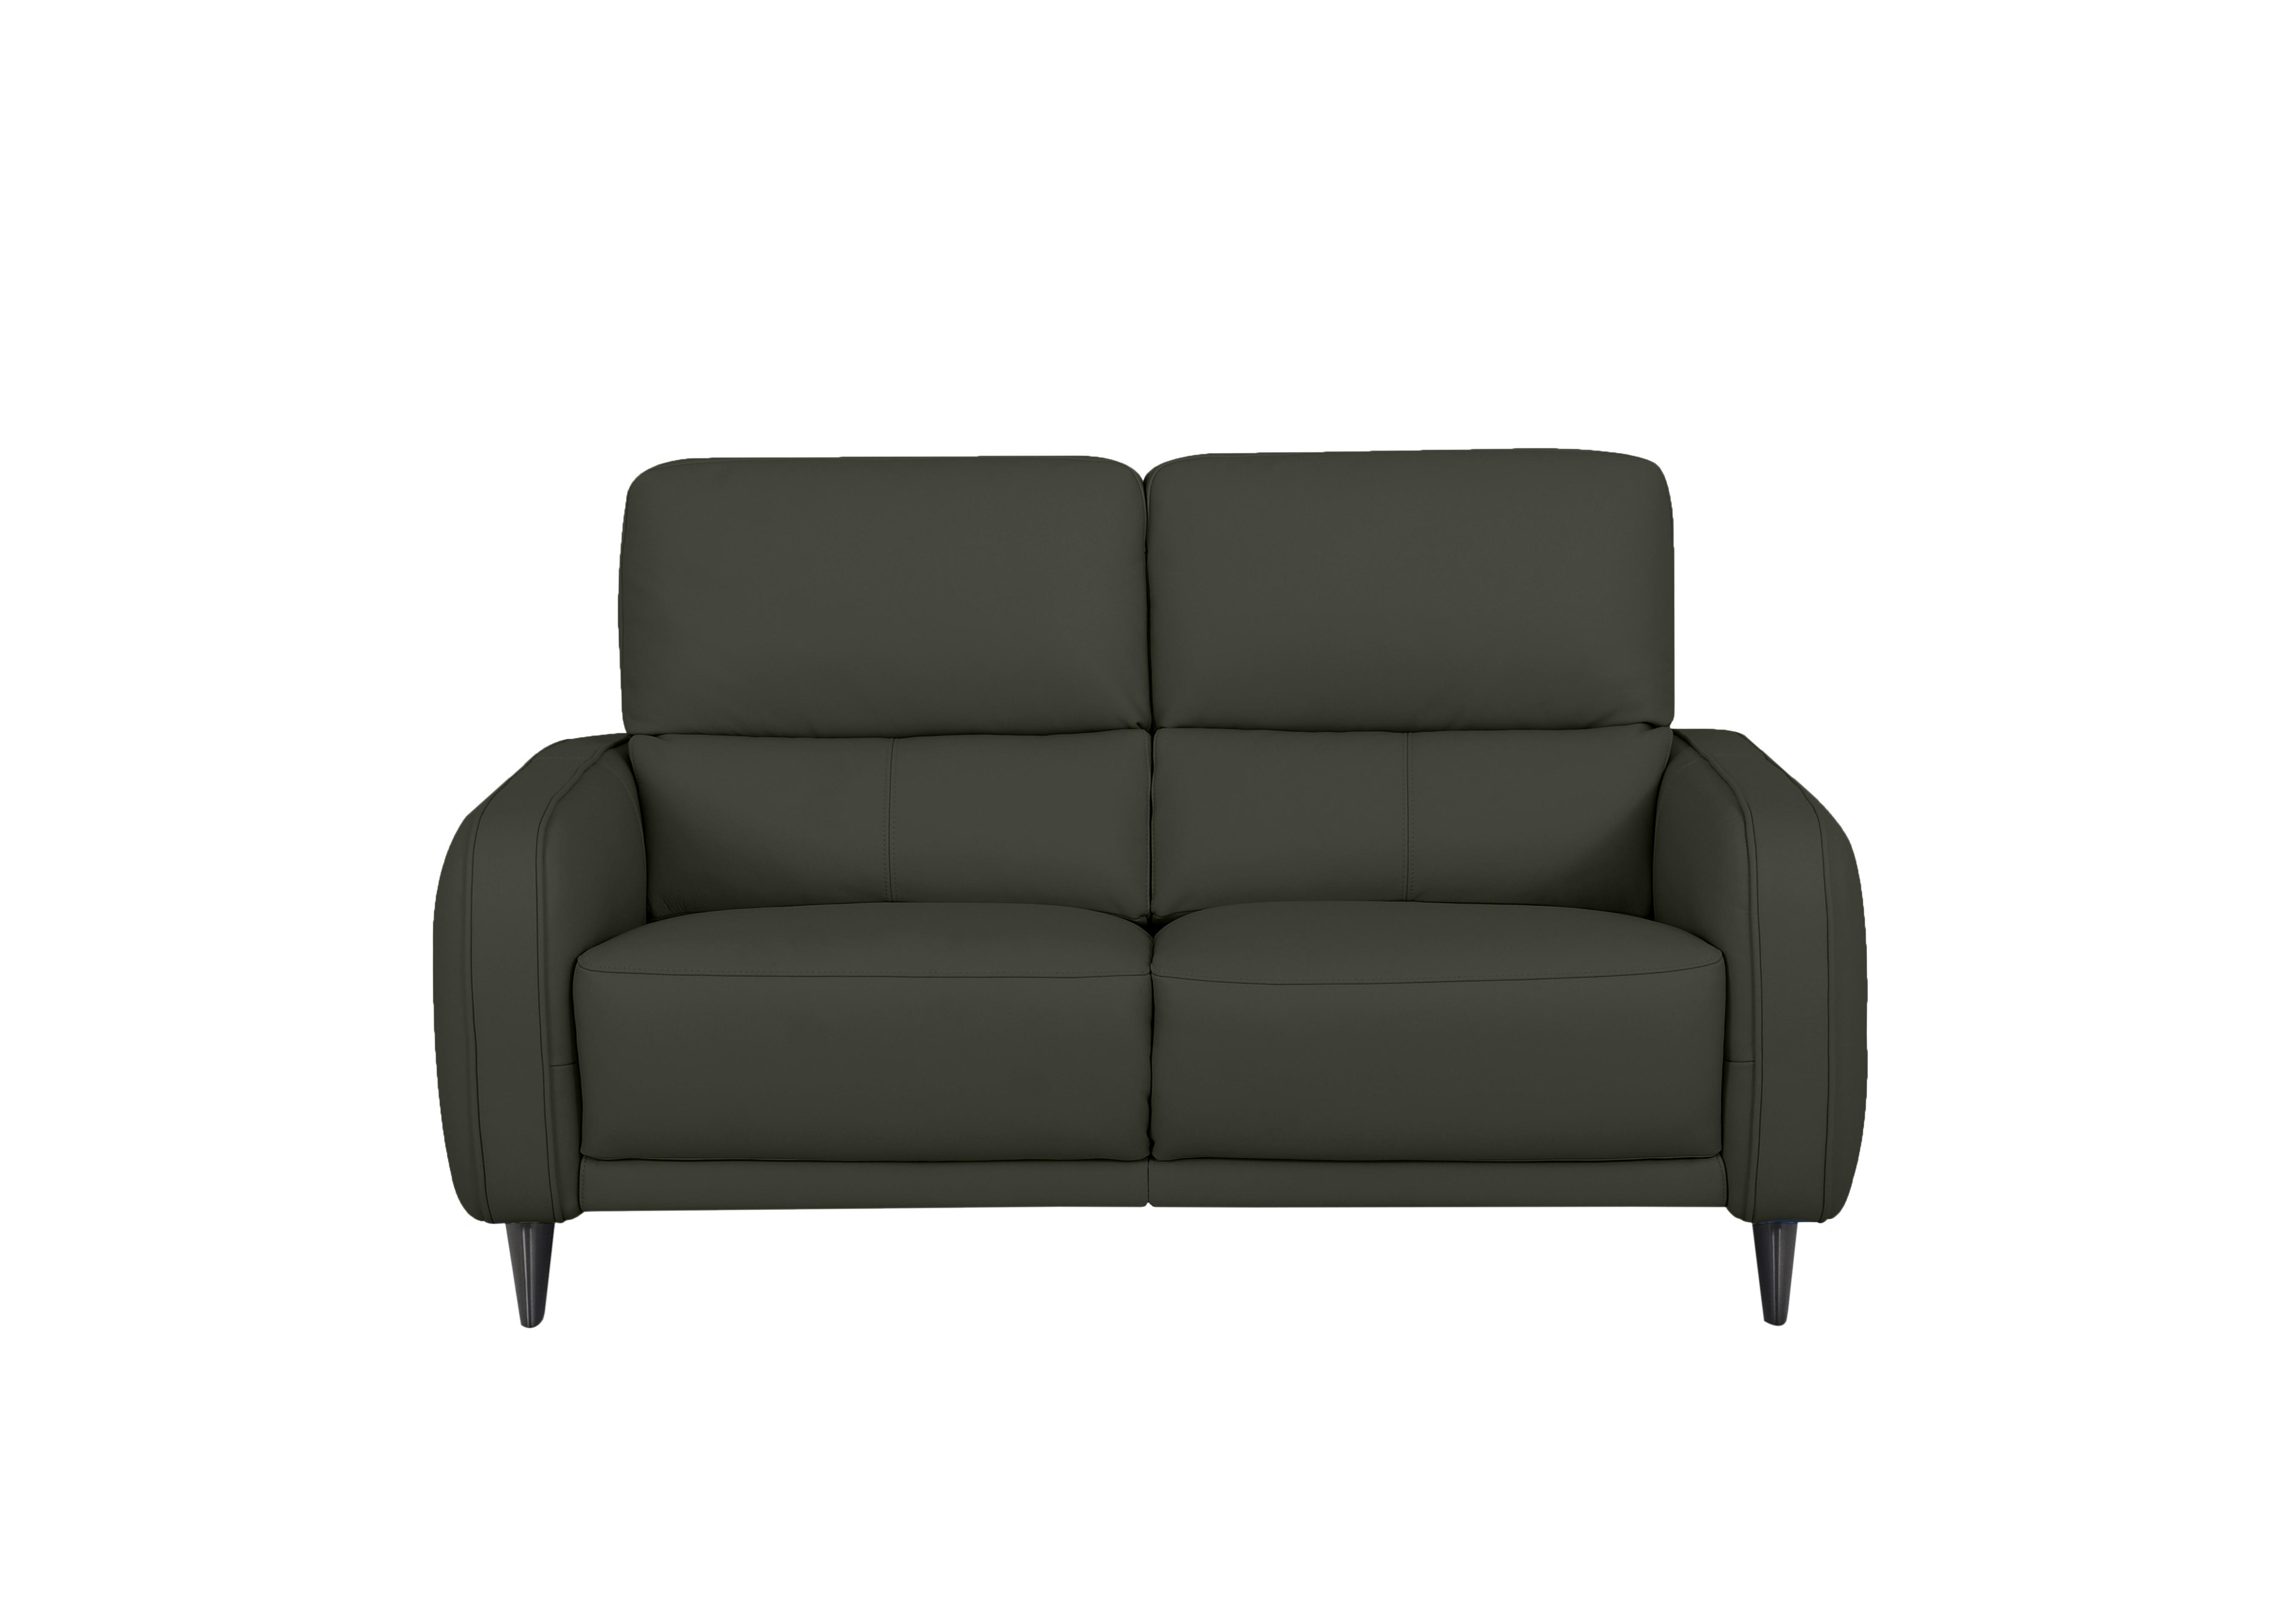 Logan 2.5 Seater Leather Sofa in Nn-570e Olive Green on Furniture Village